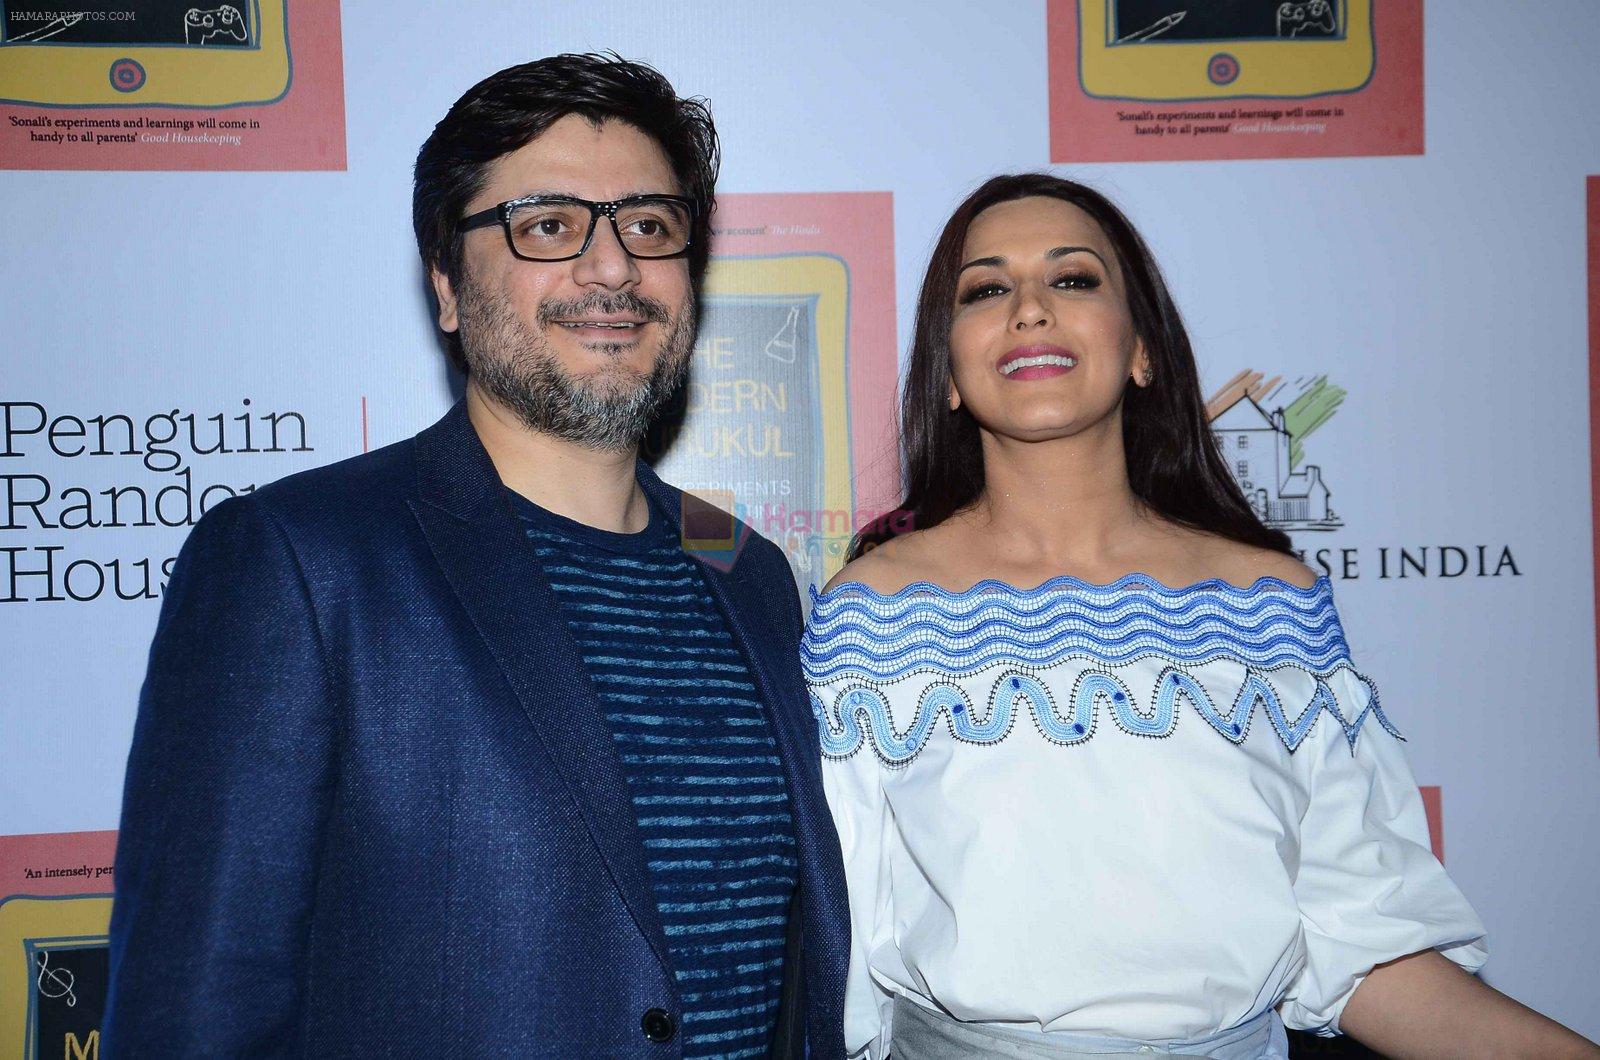 Sonali Bendre's book launch on 3rd March 2016